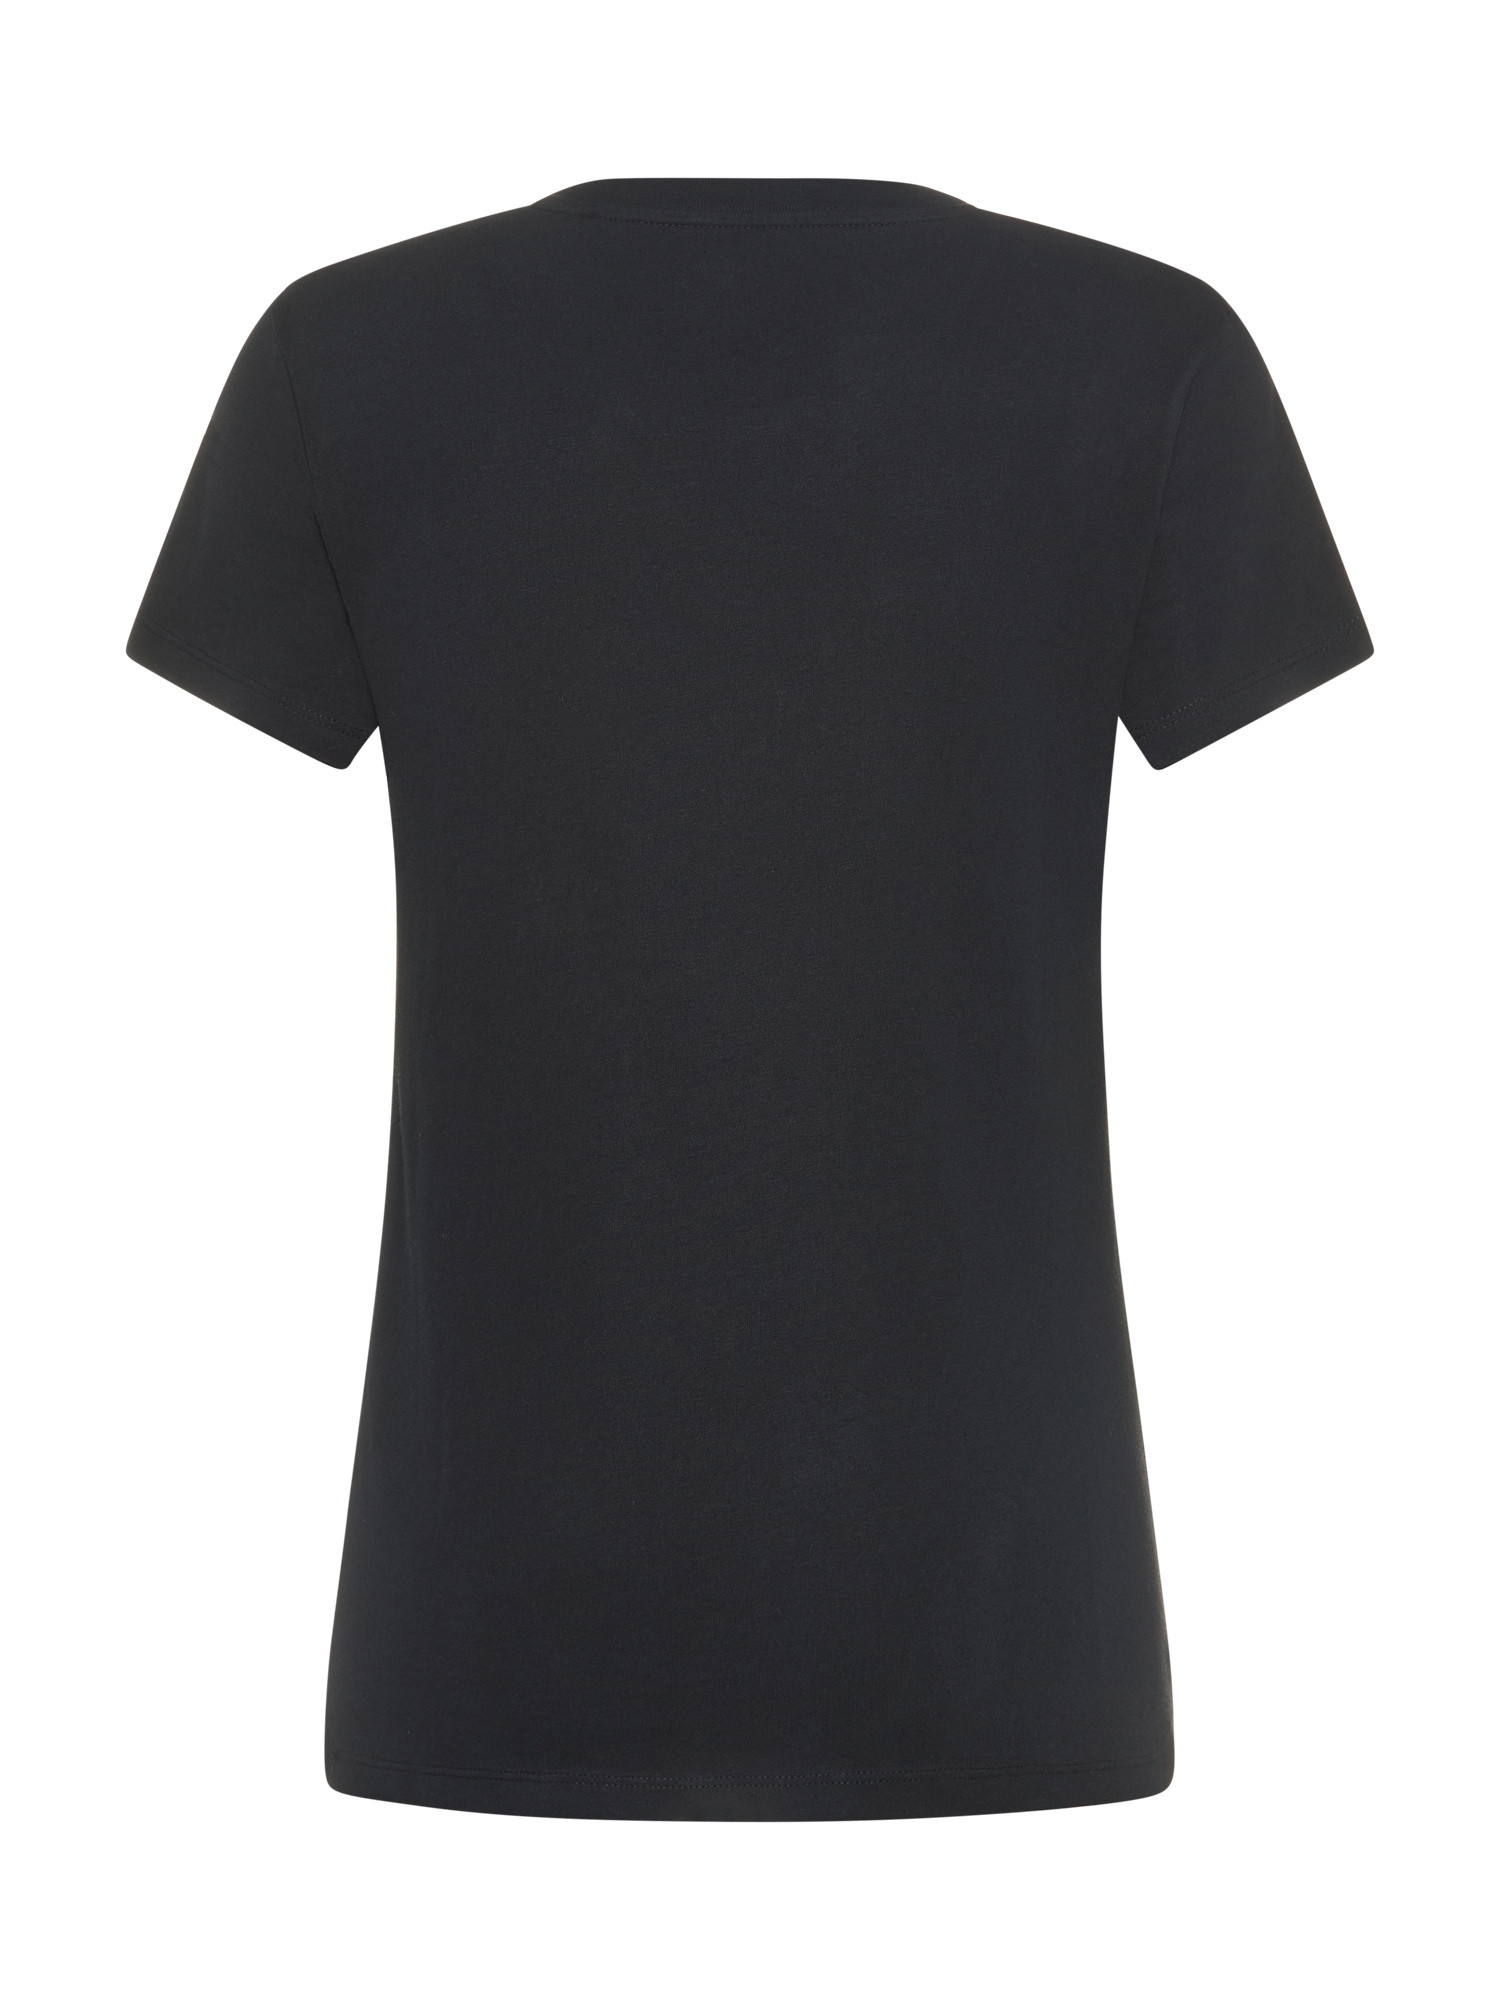 Levi's - T-shirt in cotone con logo, Nero, large image number 1